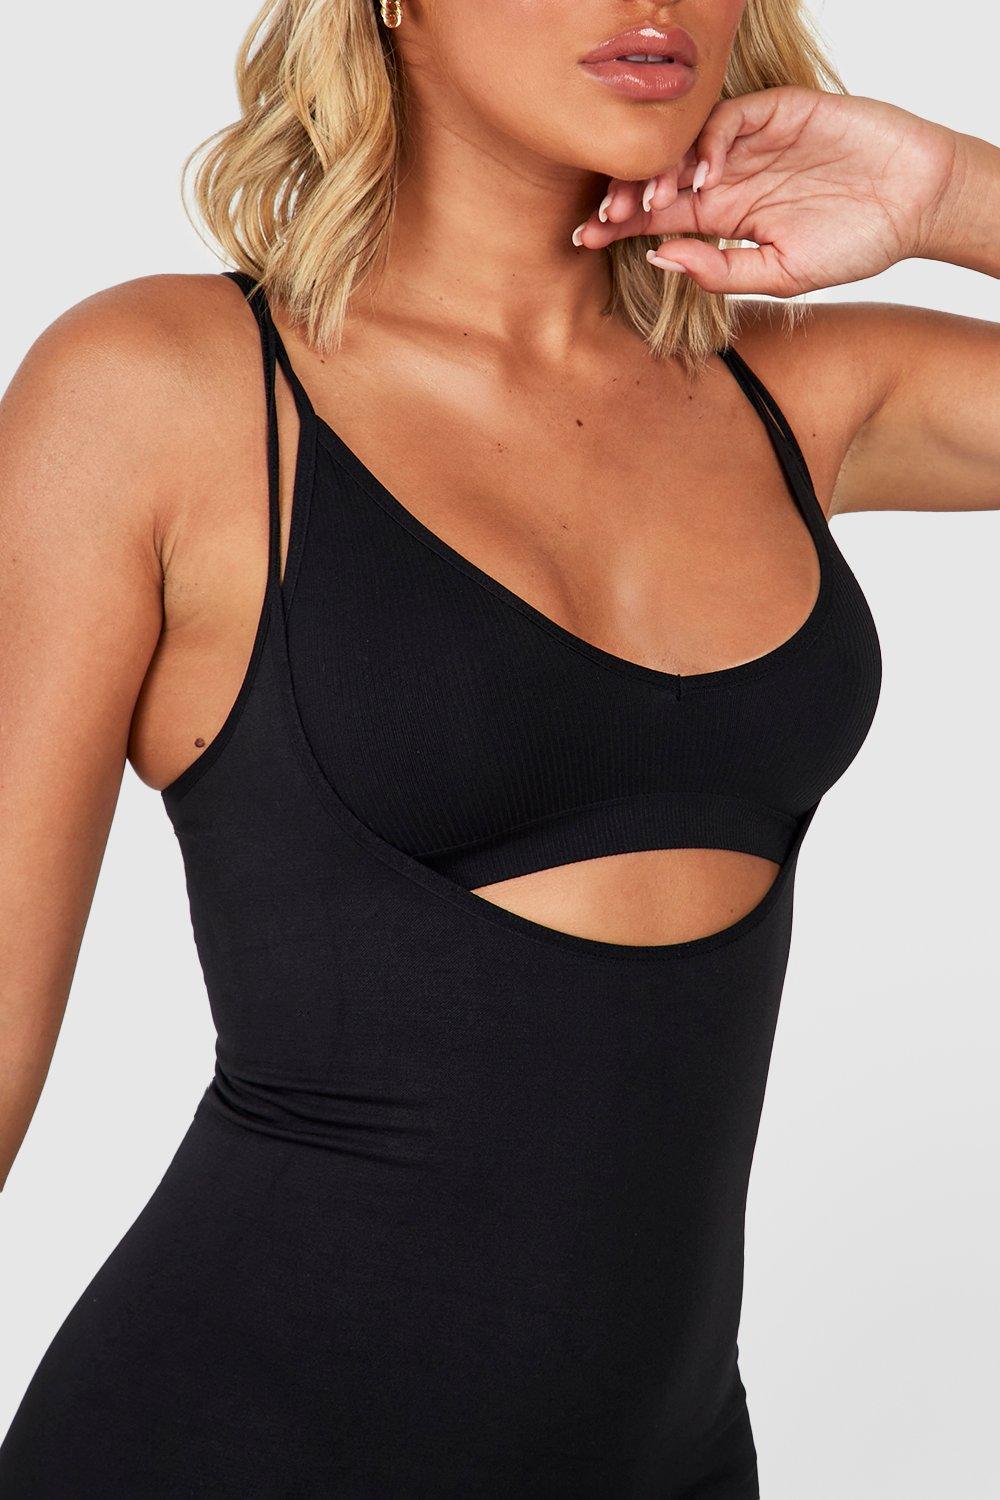 In a size small. Linked on mg #storefront under shapewear dresse